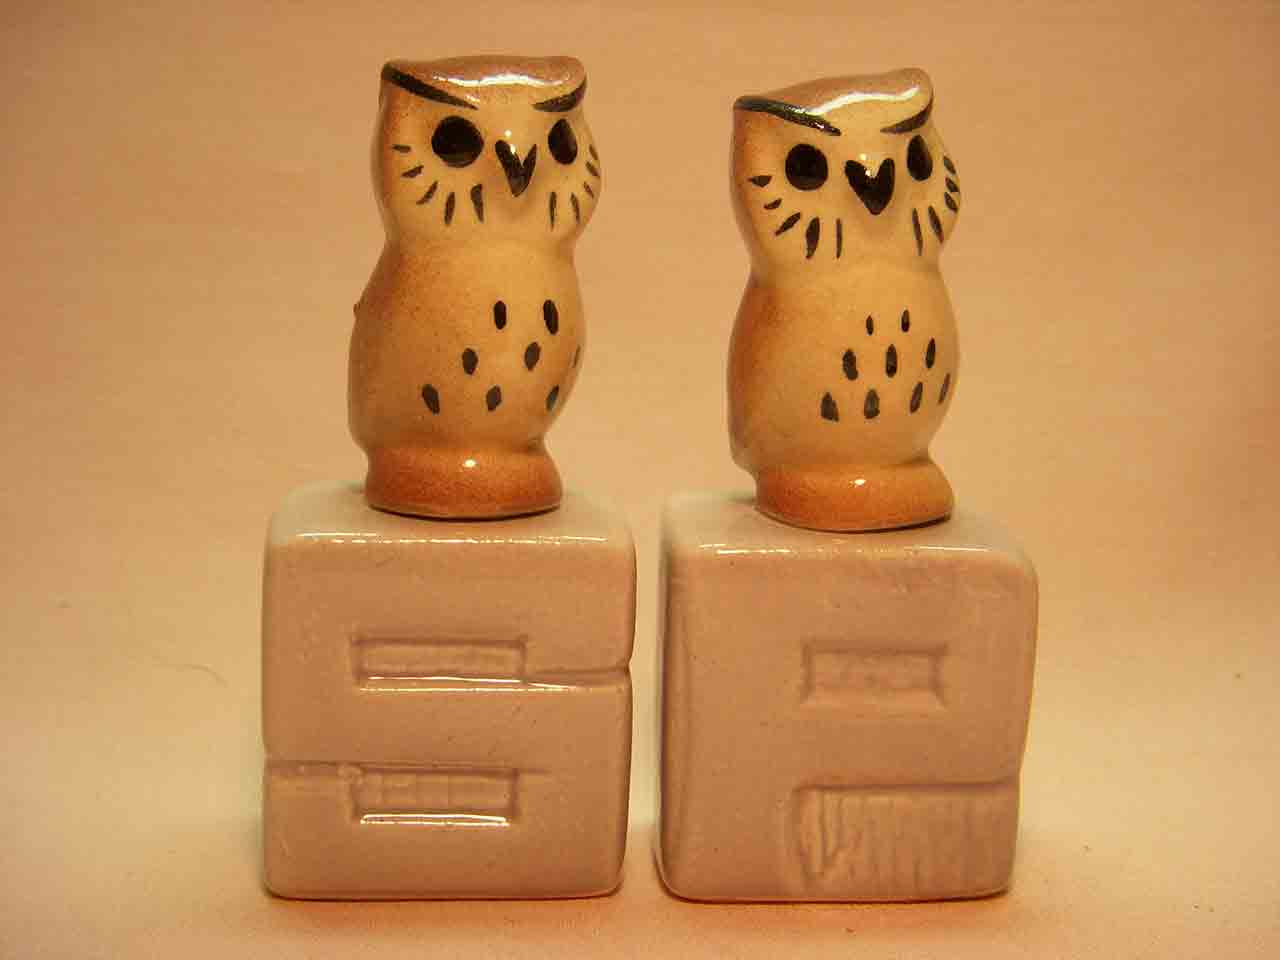 Animals on S&P letters salt and pepper shakers - Owls